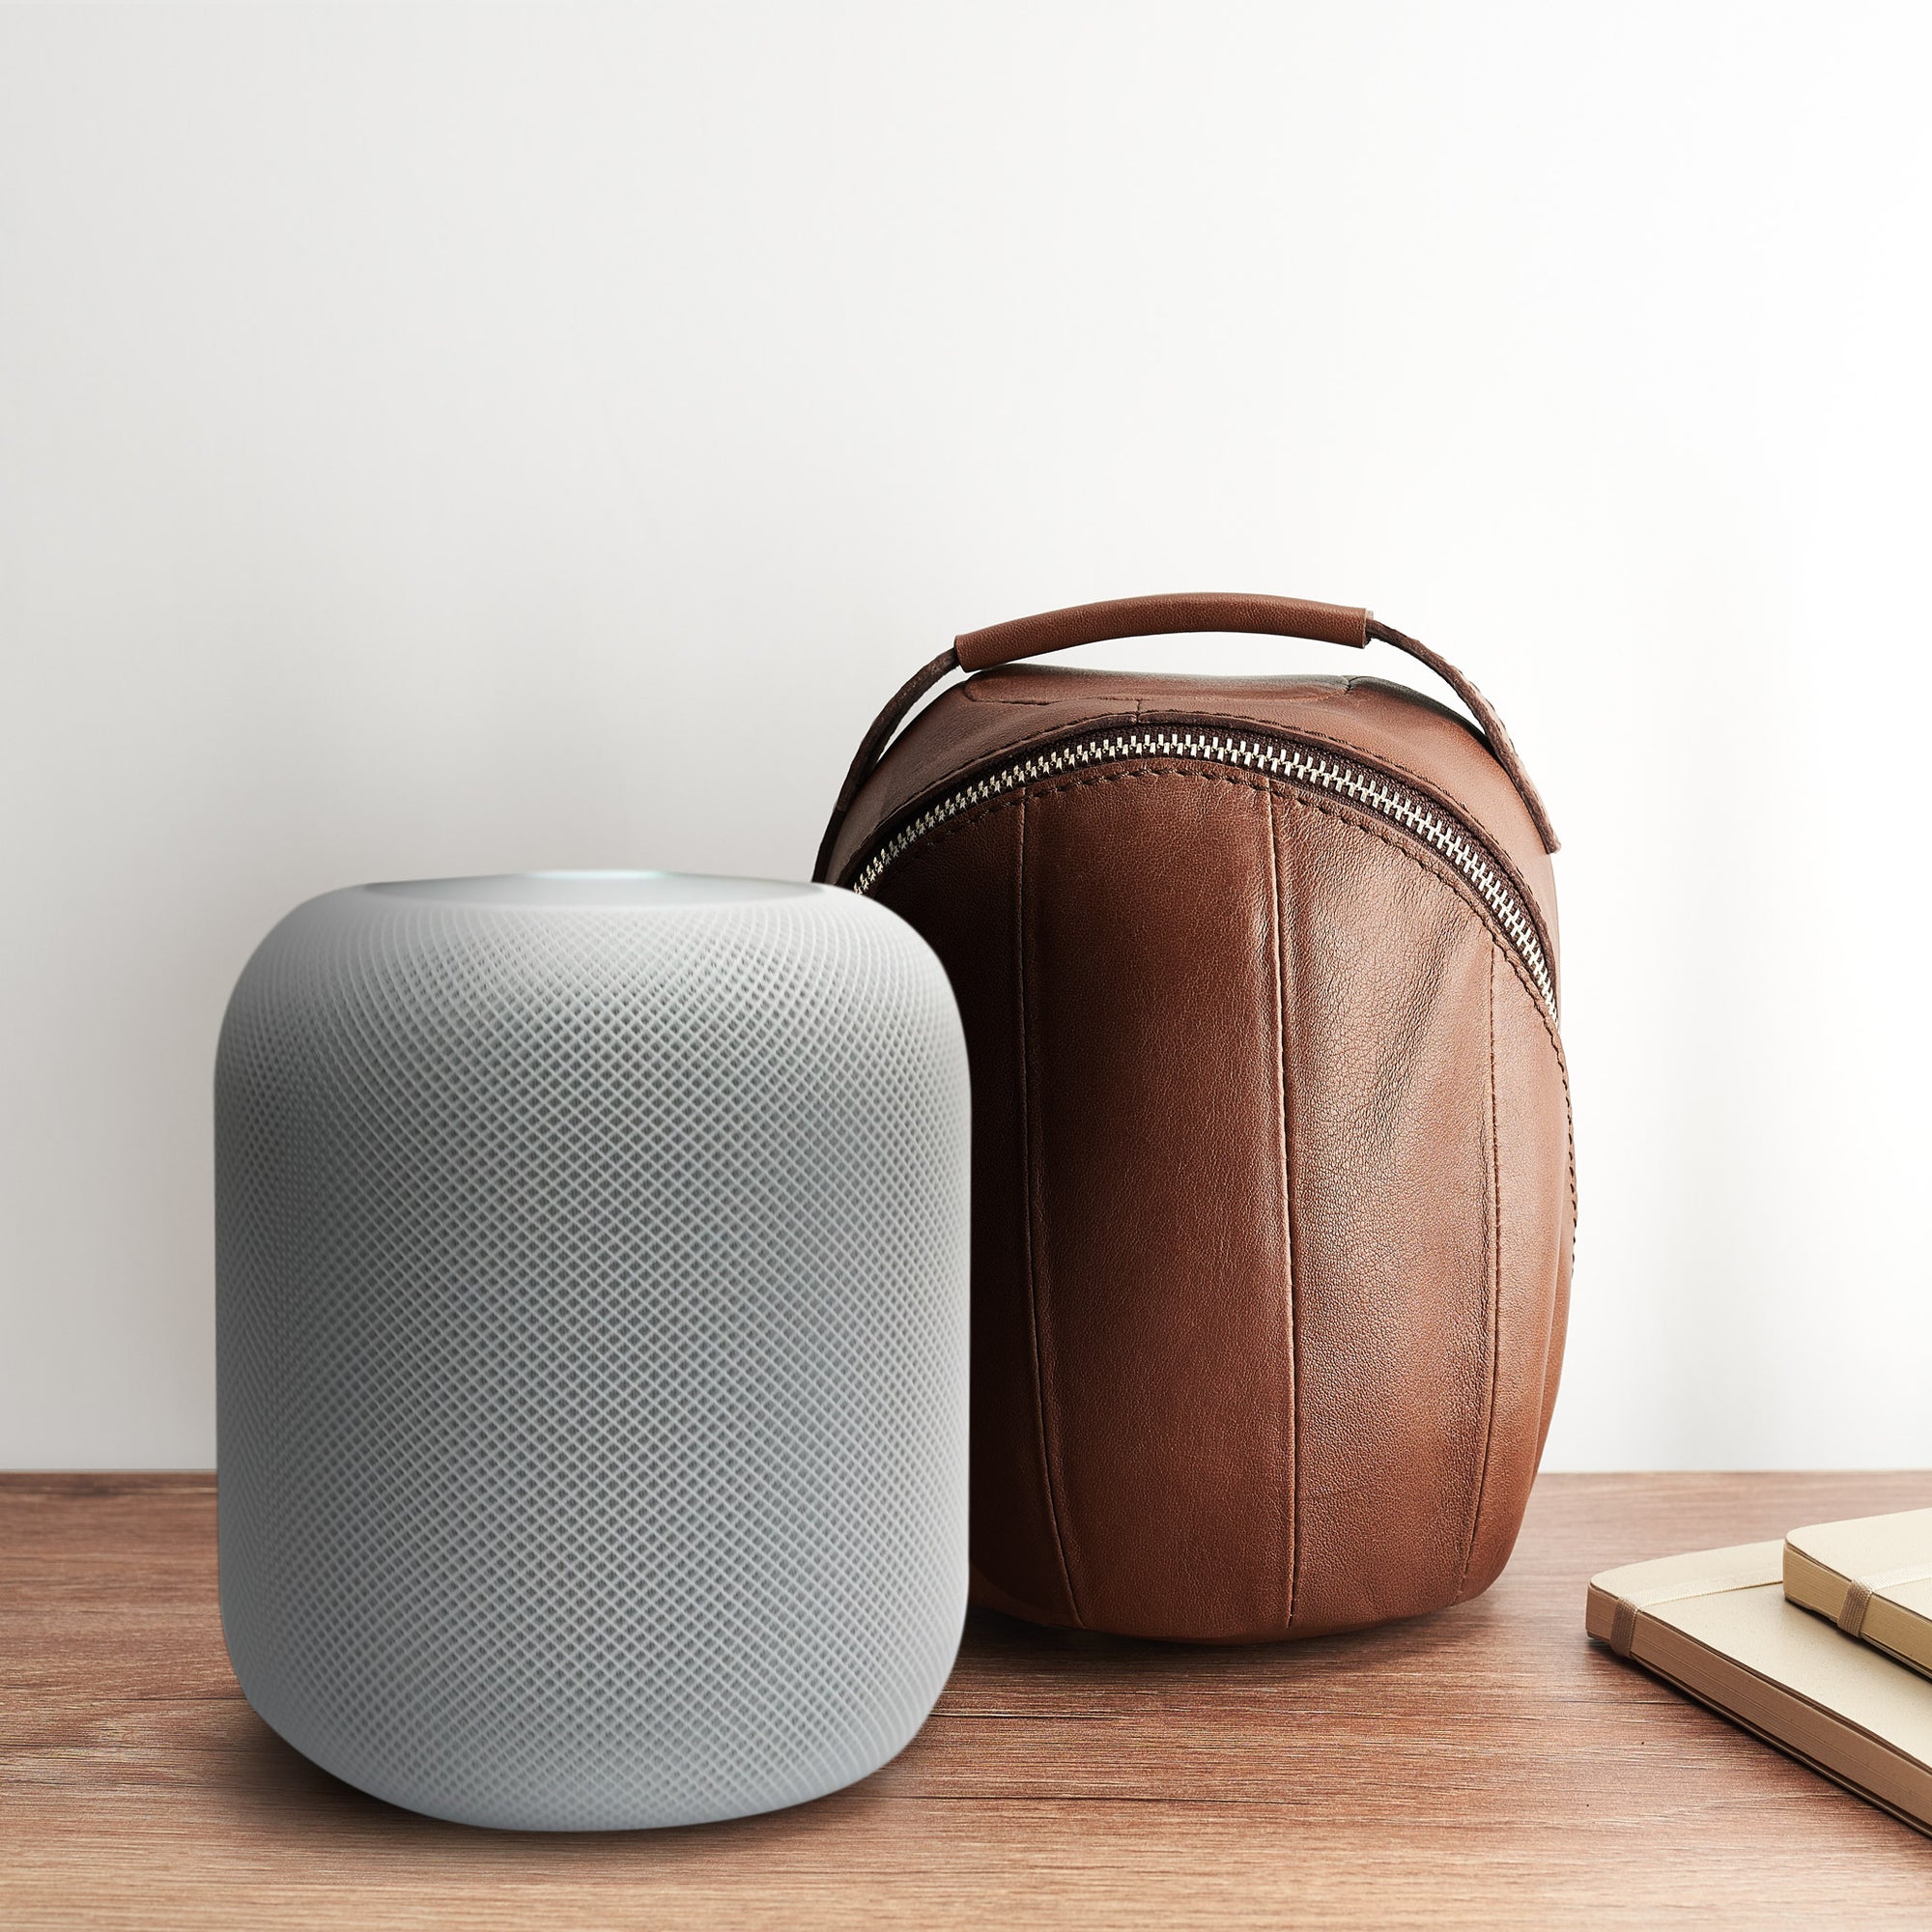 Living room. Homepod leather cover, Homepod leather case, Apple accessories, HomePod protector, Travel carrying case, Capra Leather